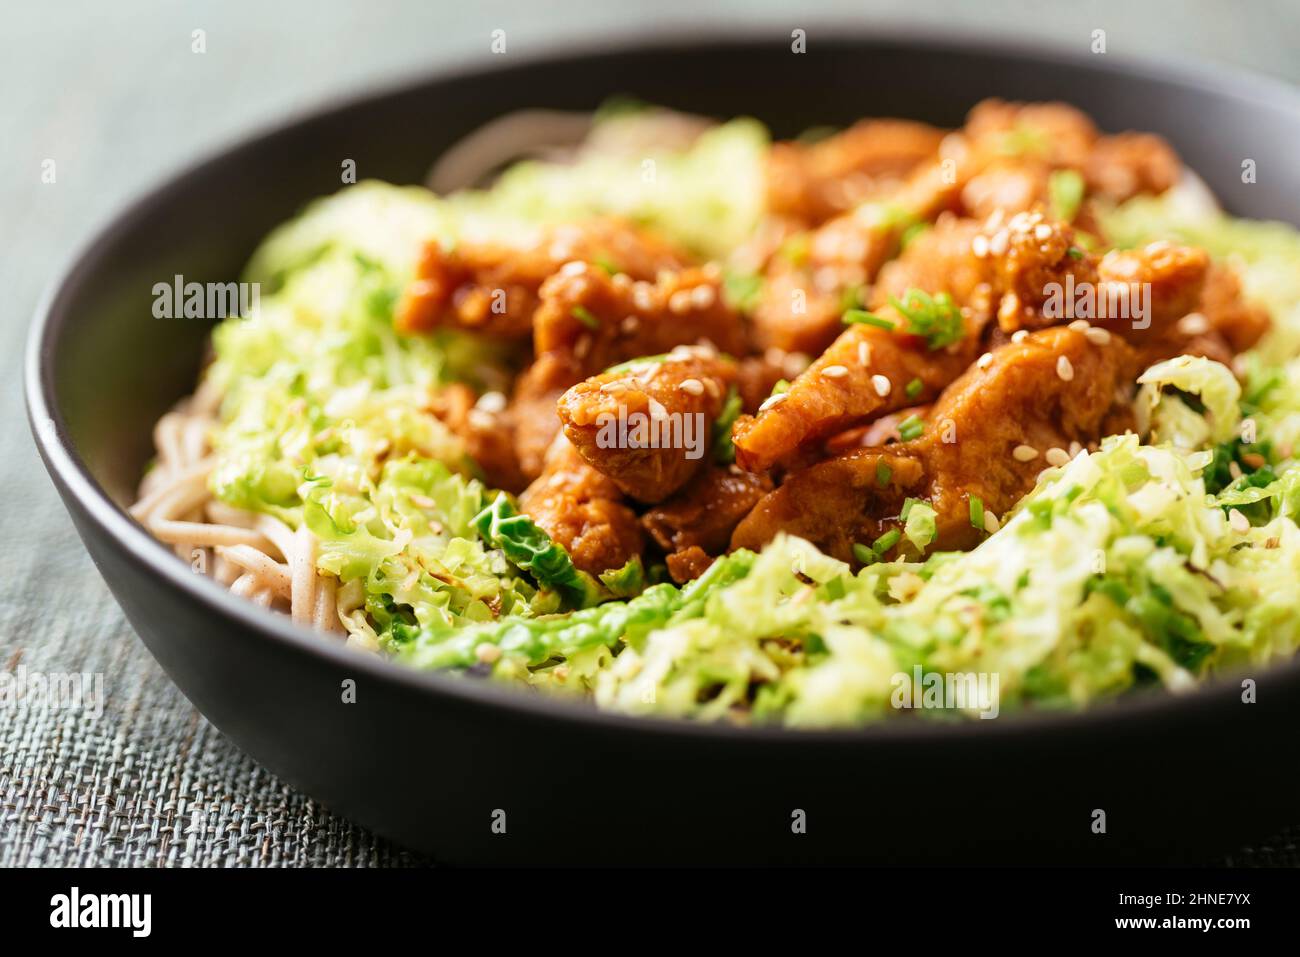 Spicy soy curls on shredded savoy cabbage, served with buckwheat noodles. Stock Photo